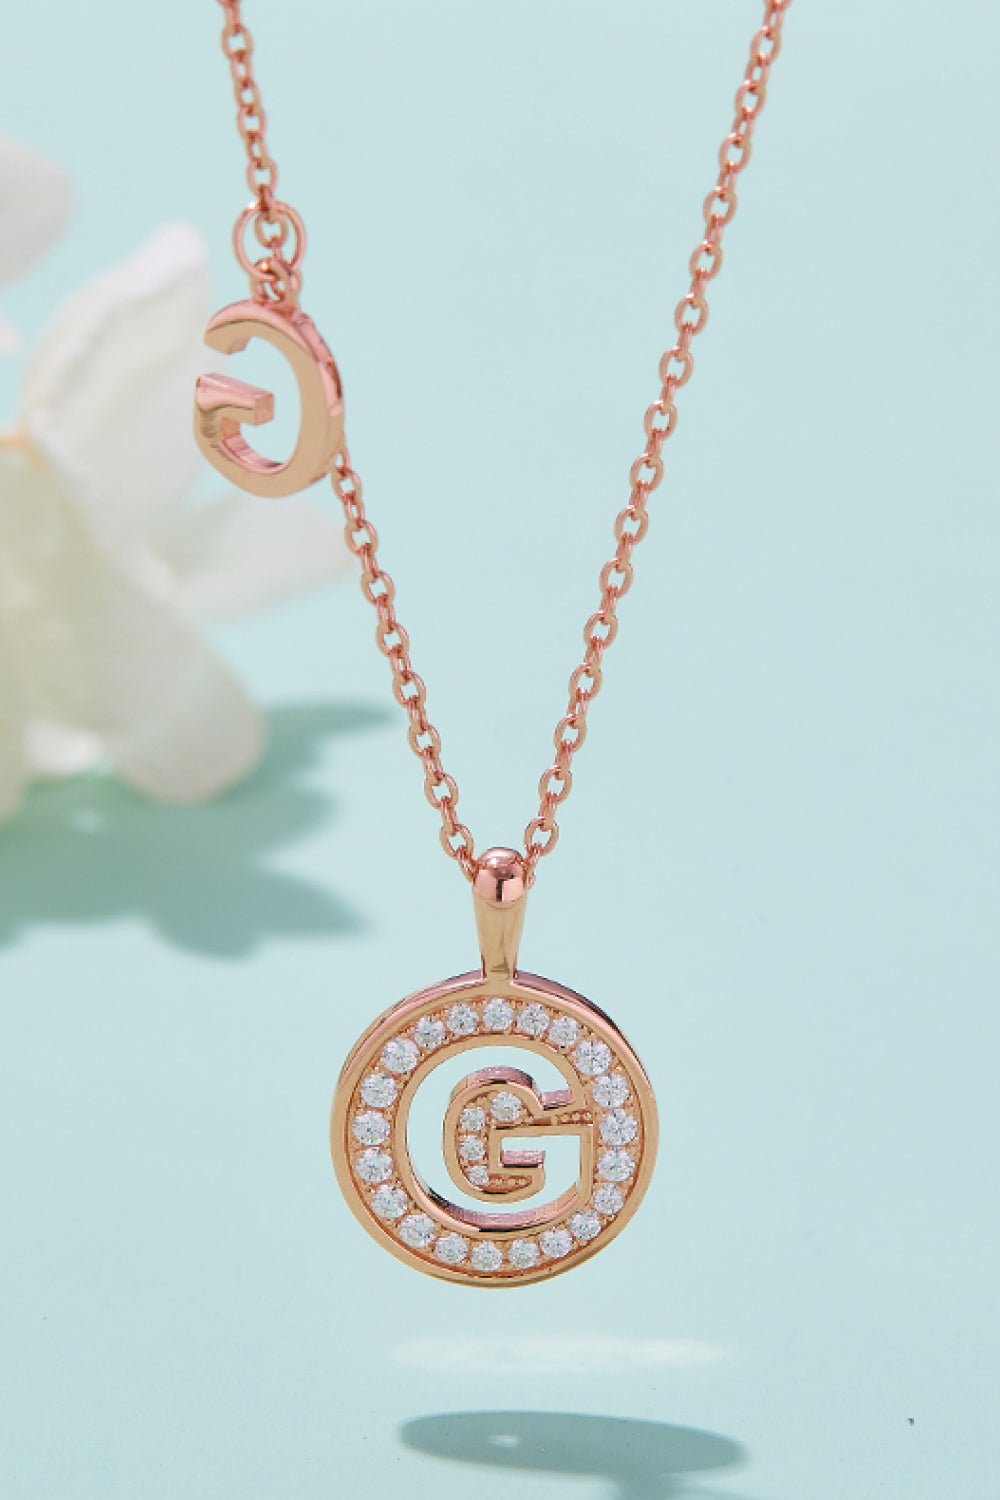 Moissanite A to J Pendant Necklace - Fashion Girl Online Store